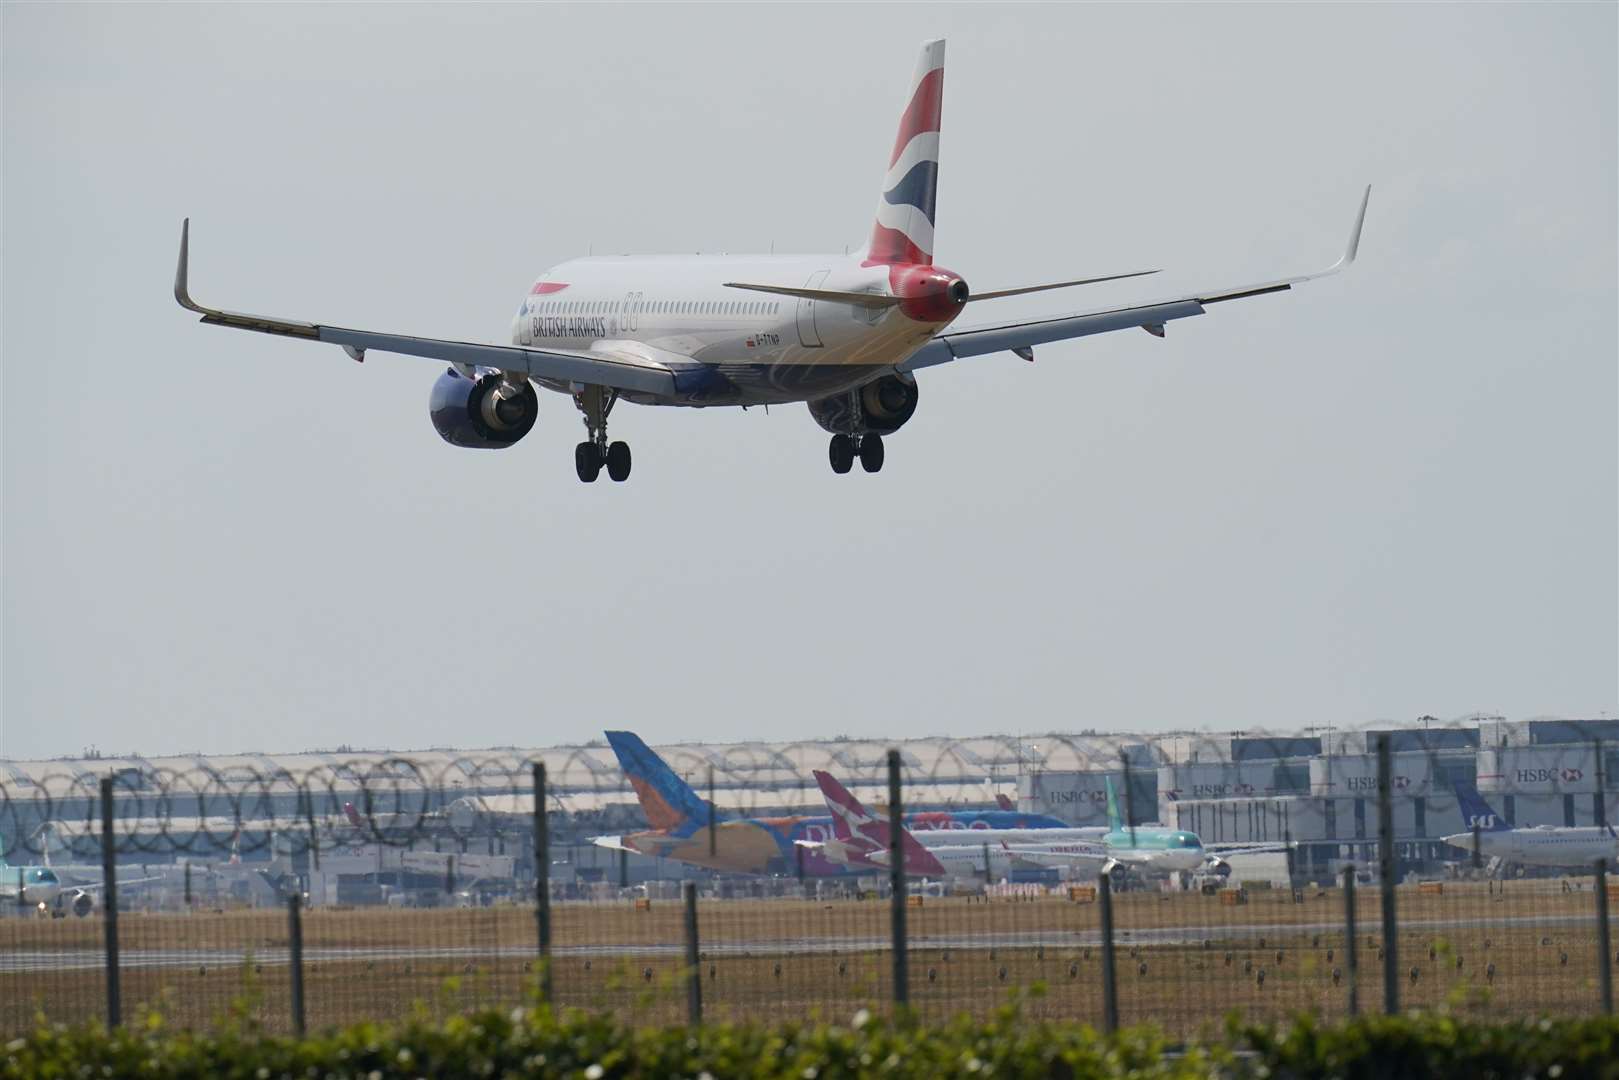 British Airways is one of the companies to confirm staff personal information was compromised (Jonathan Brady/PA)